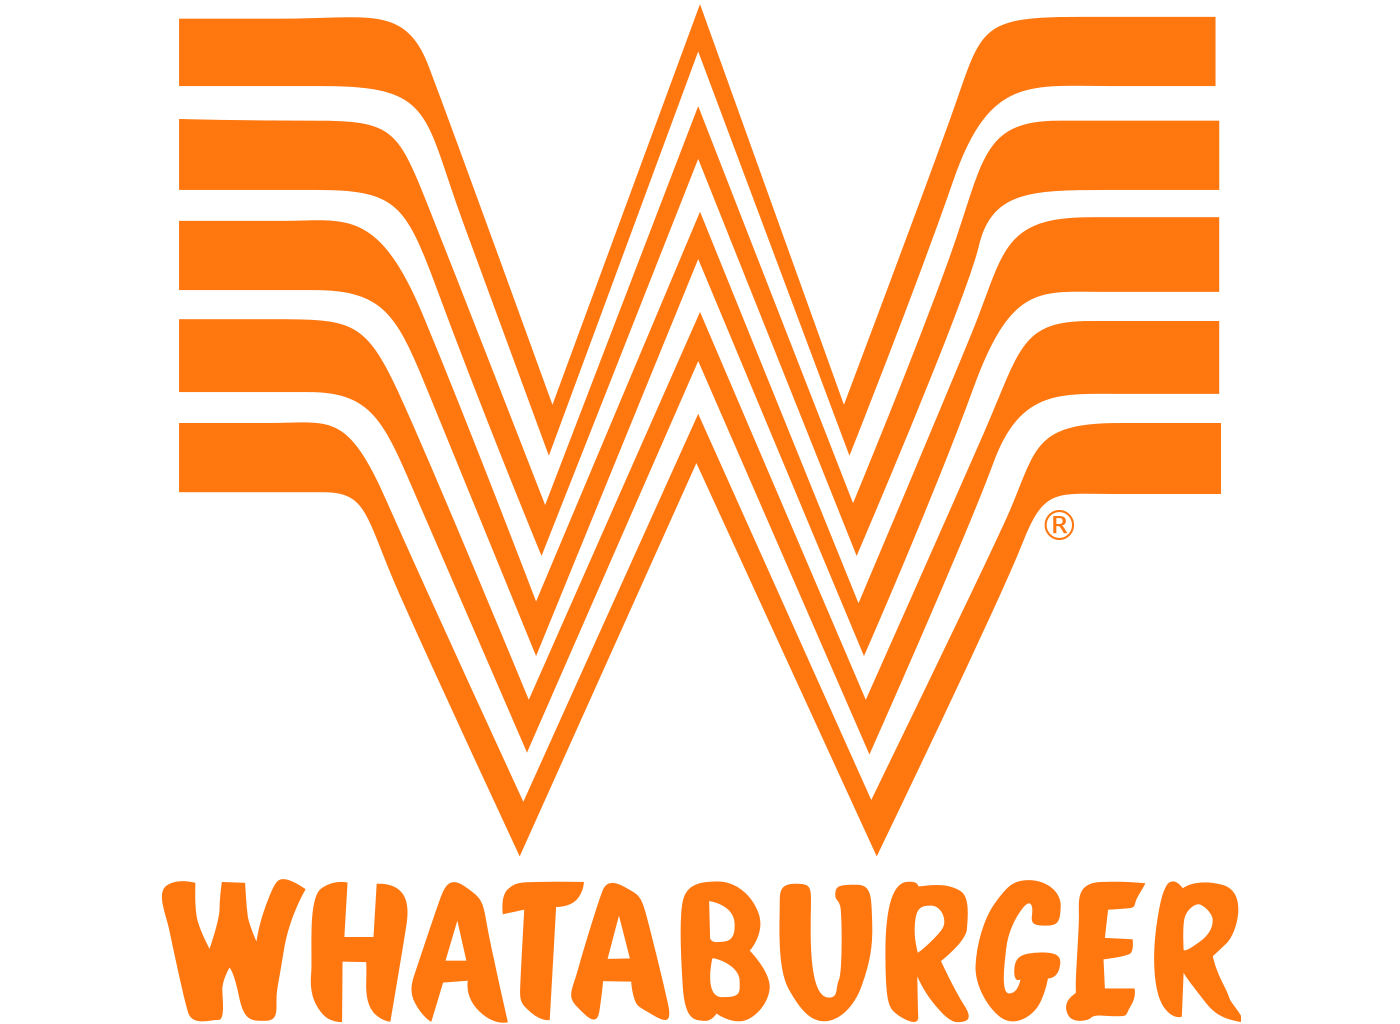 Now You Can Show Everyone Just How Much Love Your Whataburger